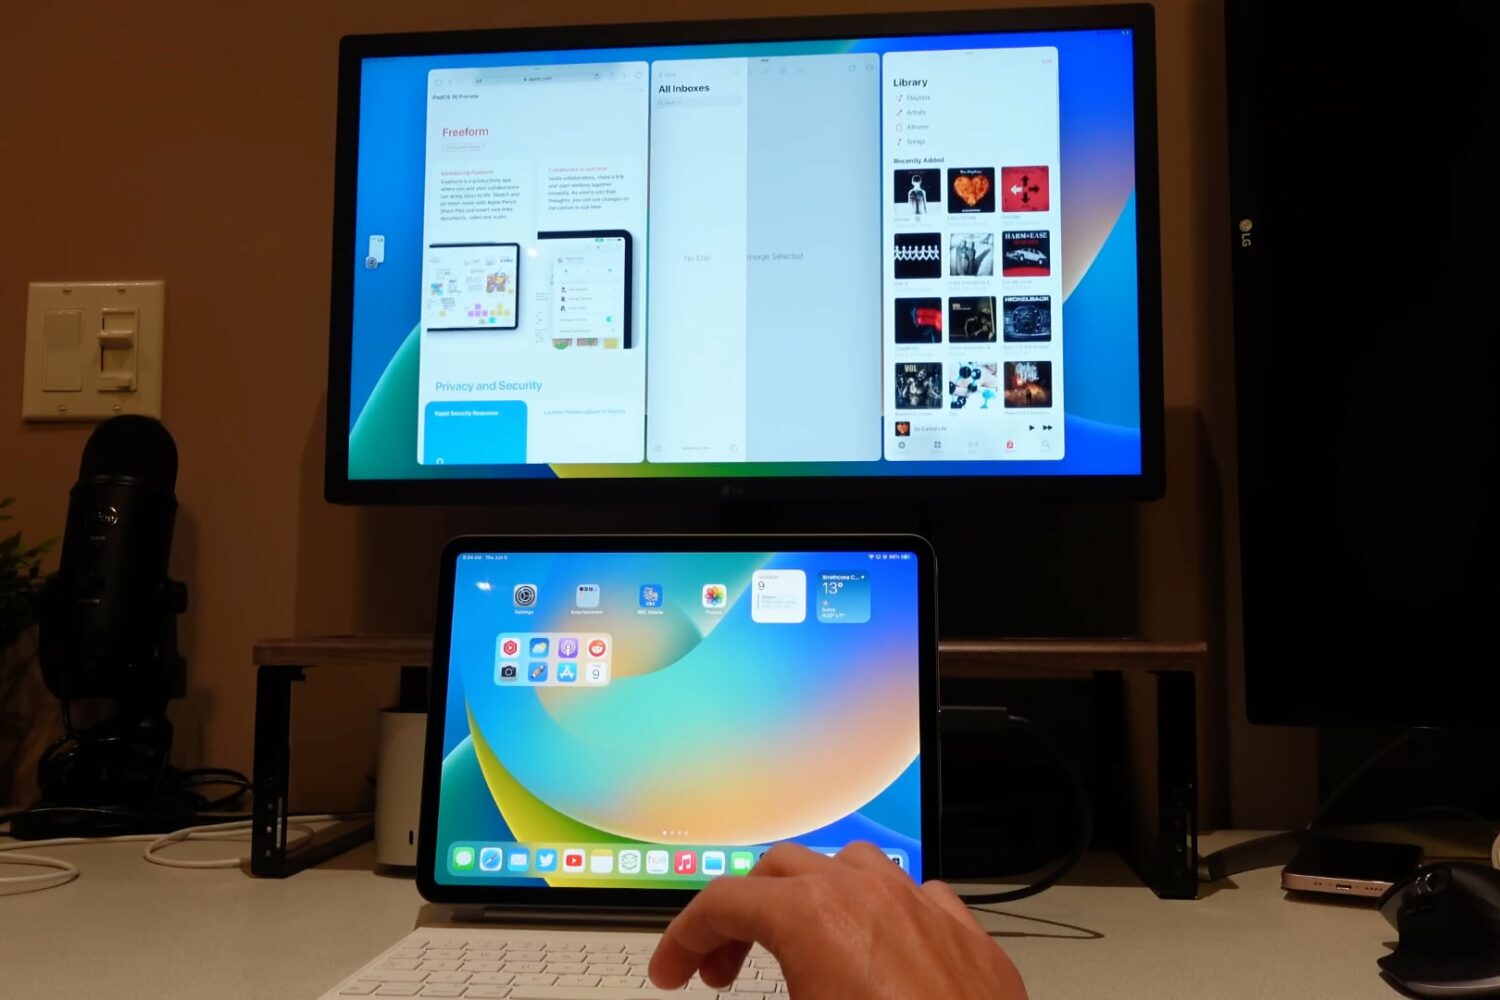 An iPad connected to an external monitor running three apps at once using Apple's Stage Manager multitasking feature in iPadOS 16